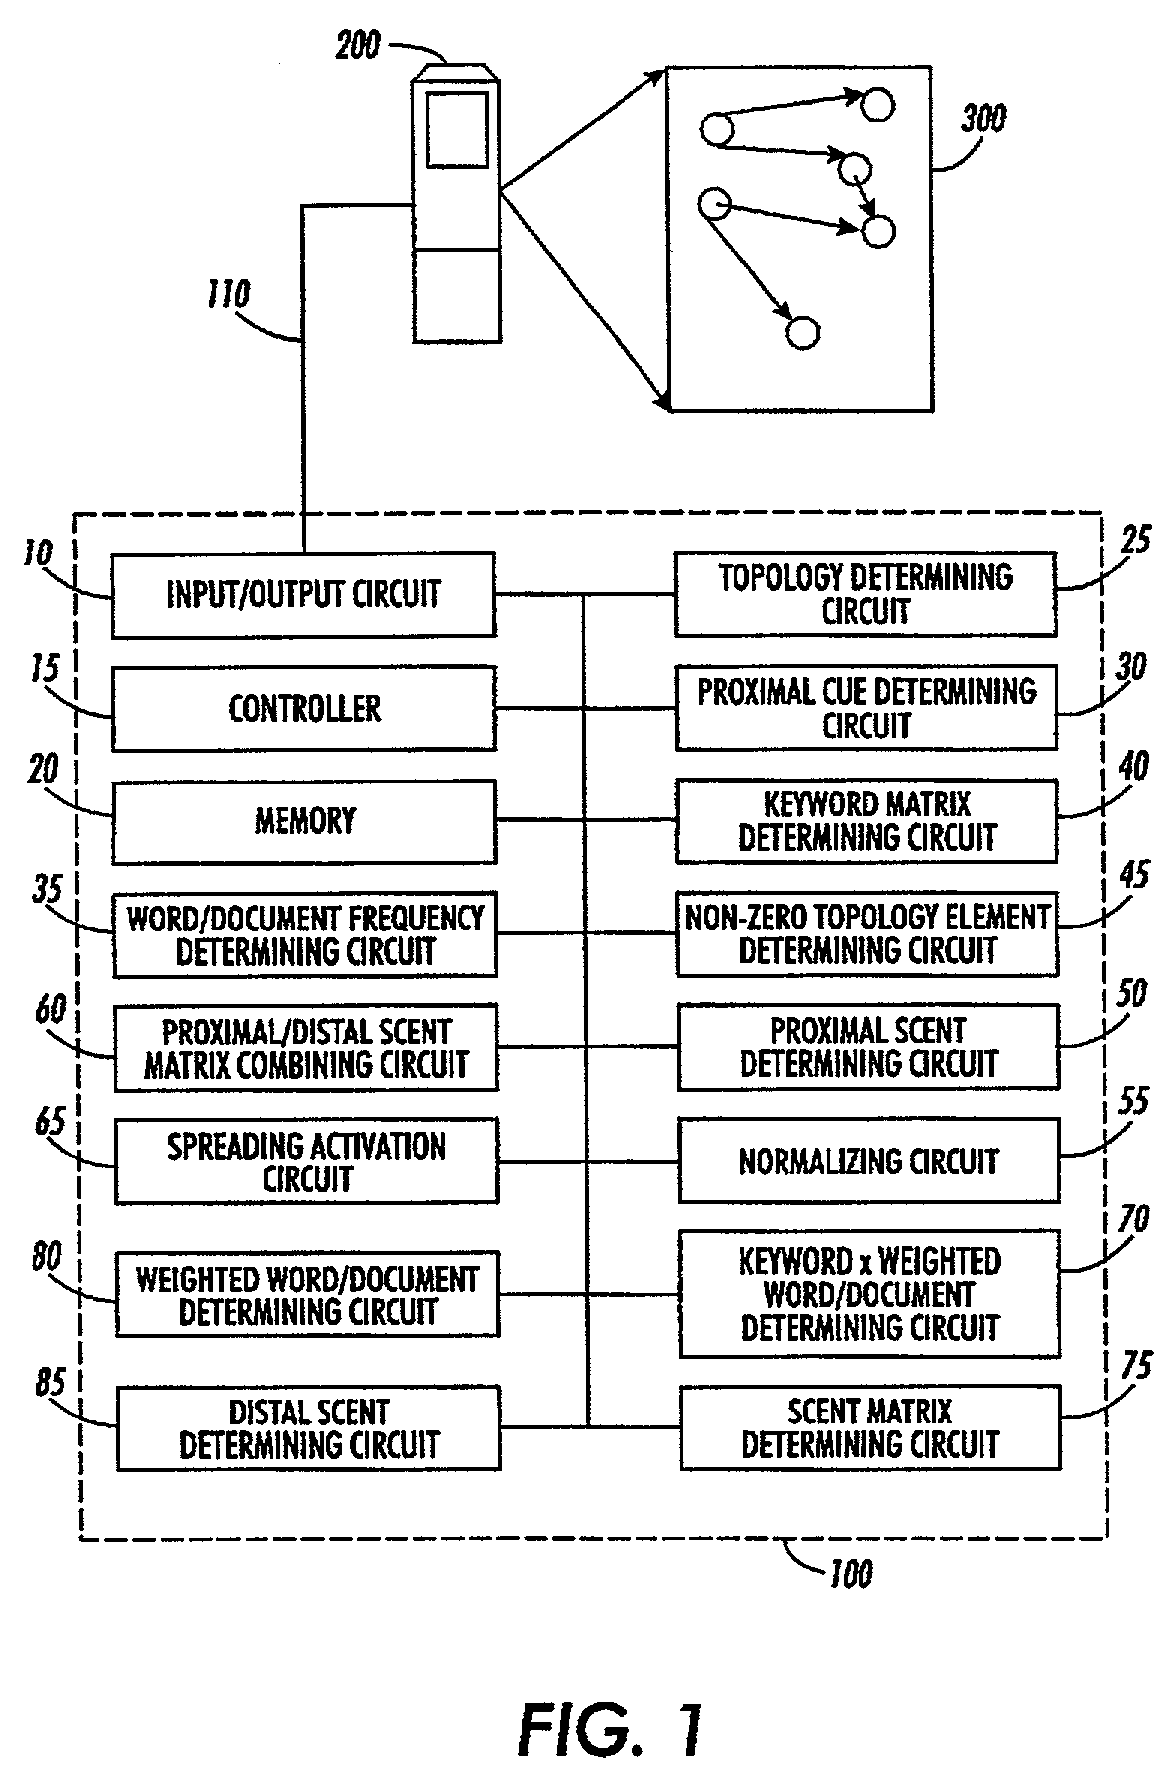 Systems and methods for assessing user success rates of accessing information in a collection of contents